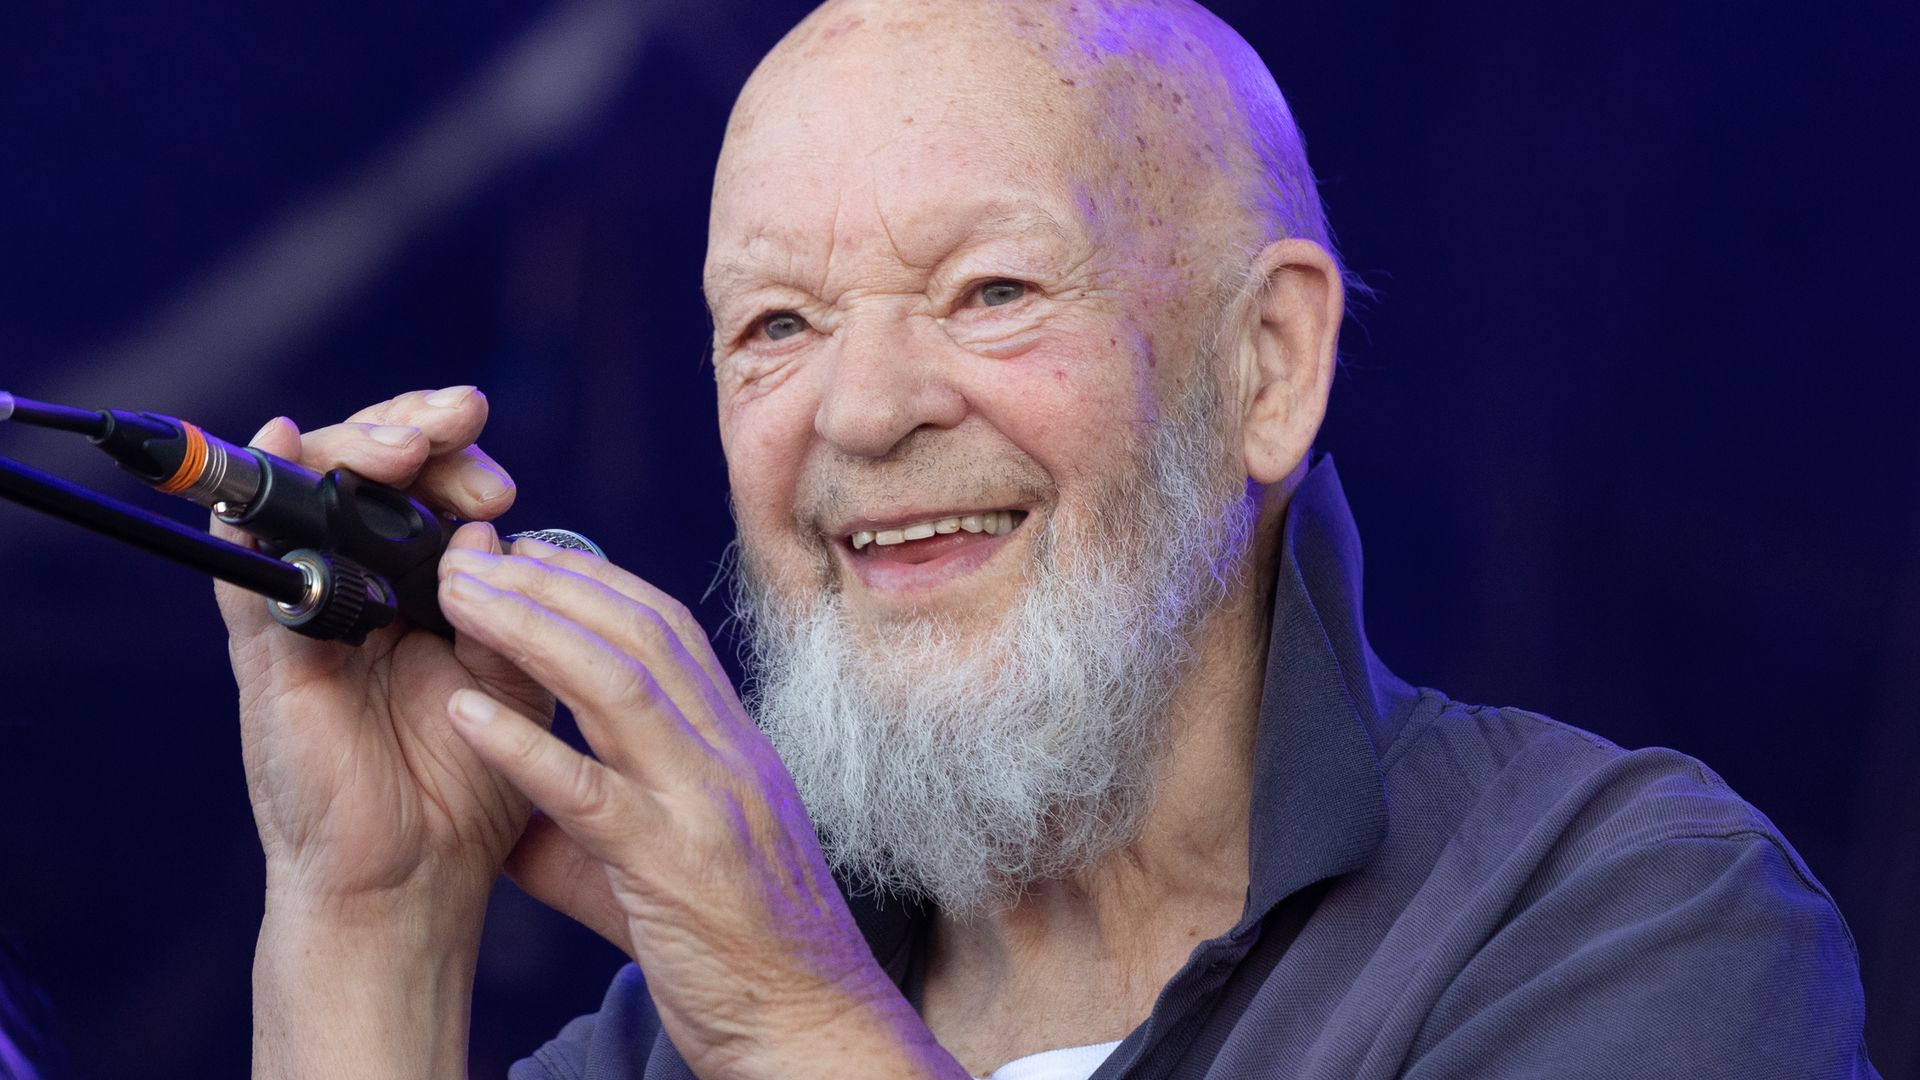 Glastonbury founder Sir Michael Eavis makes surprising claim about Prince Harry as he is knighted